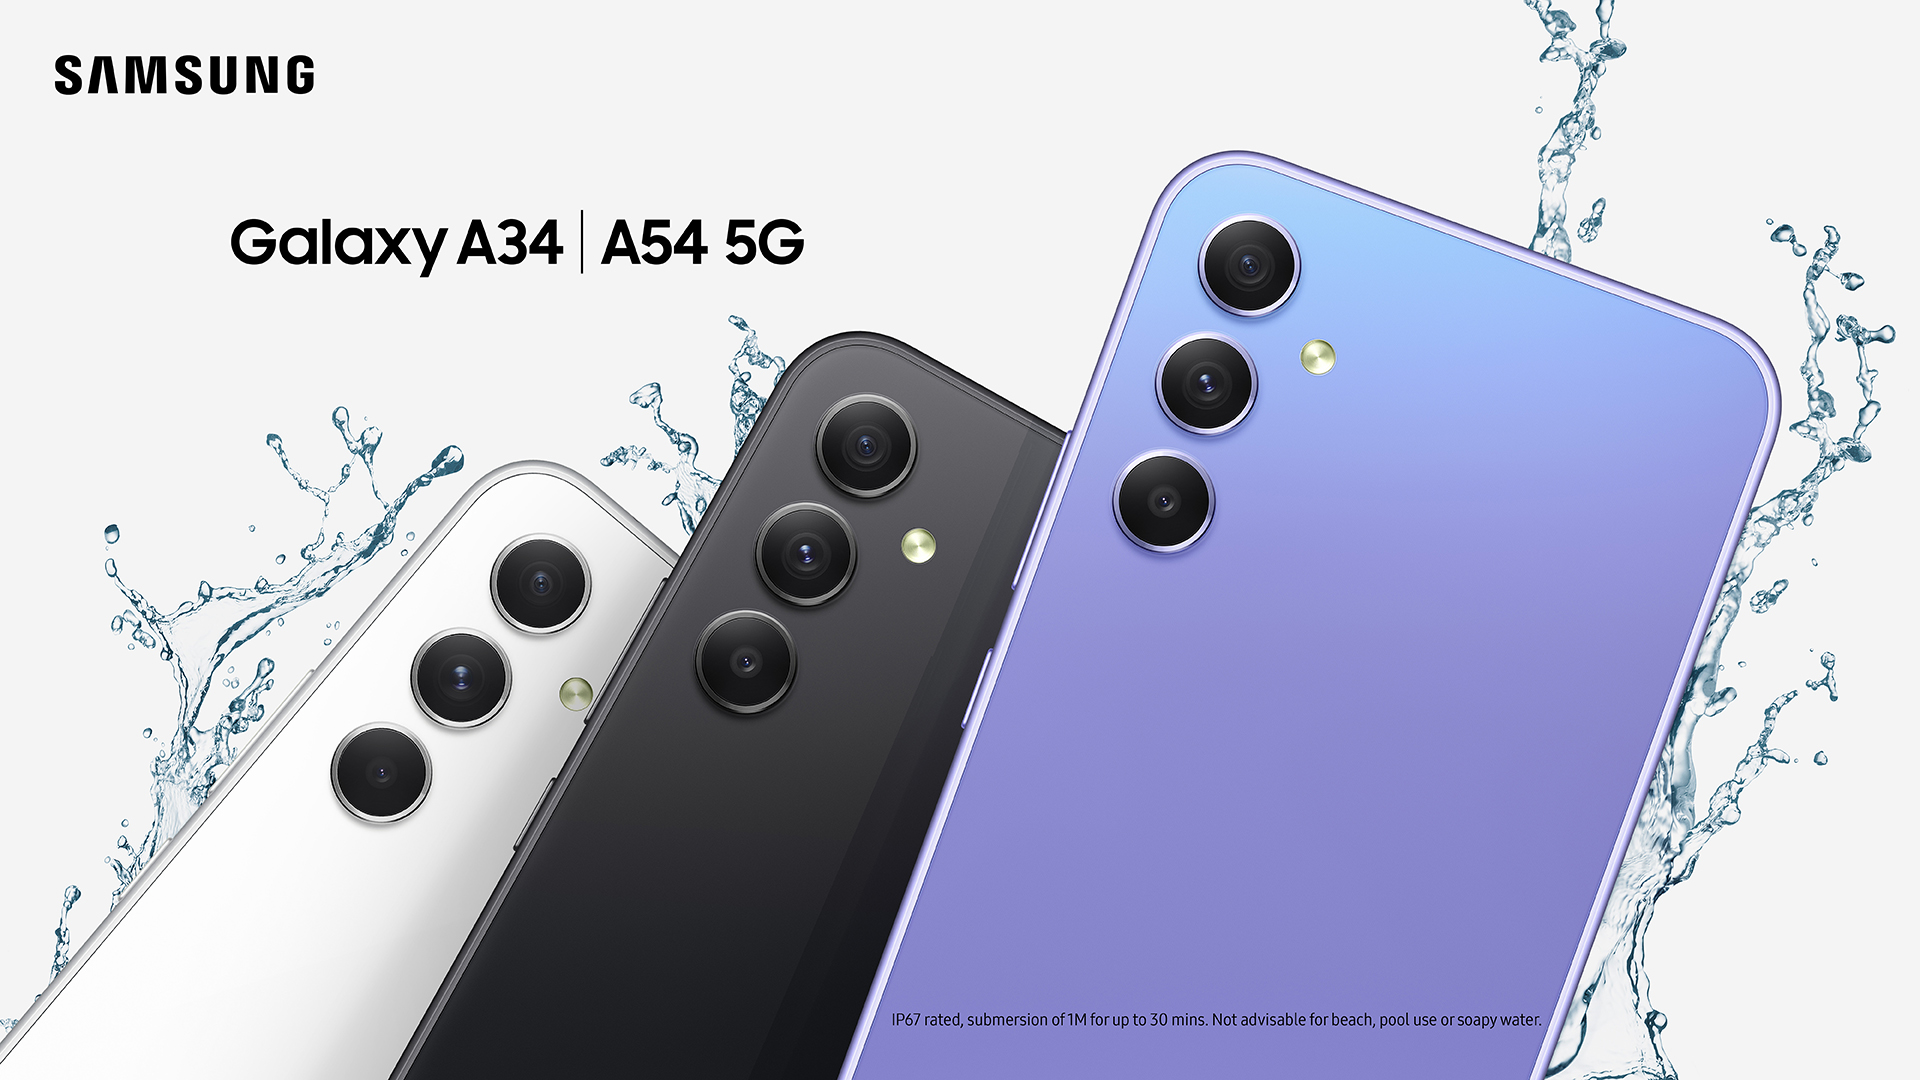 Samsung Galaxy A54 vs A34 - Which Should You Buy? 